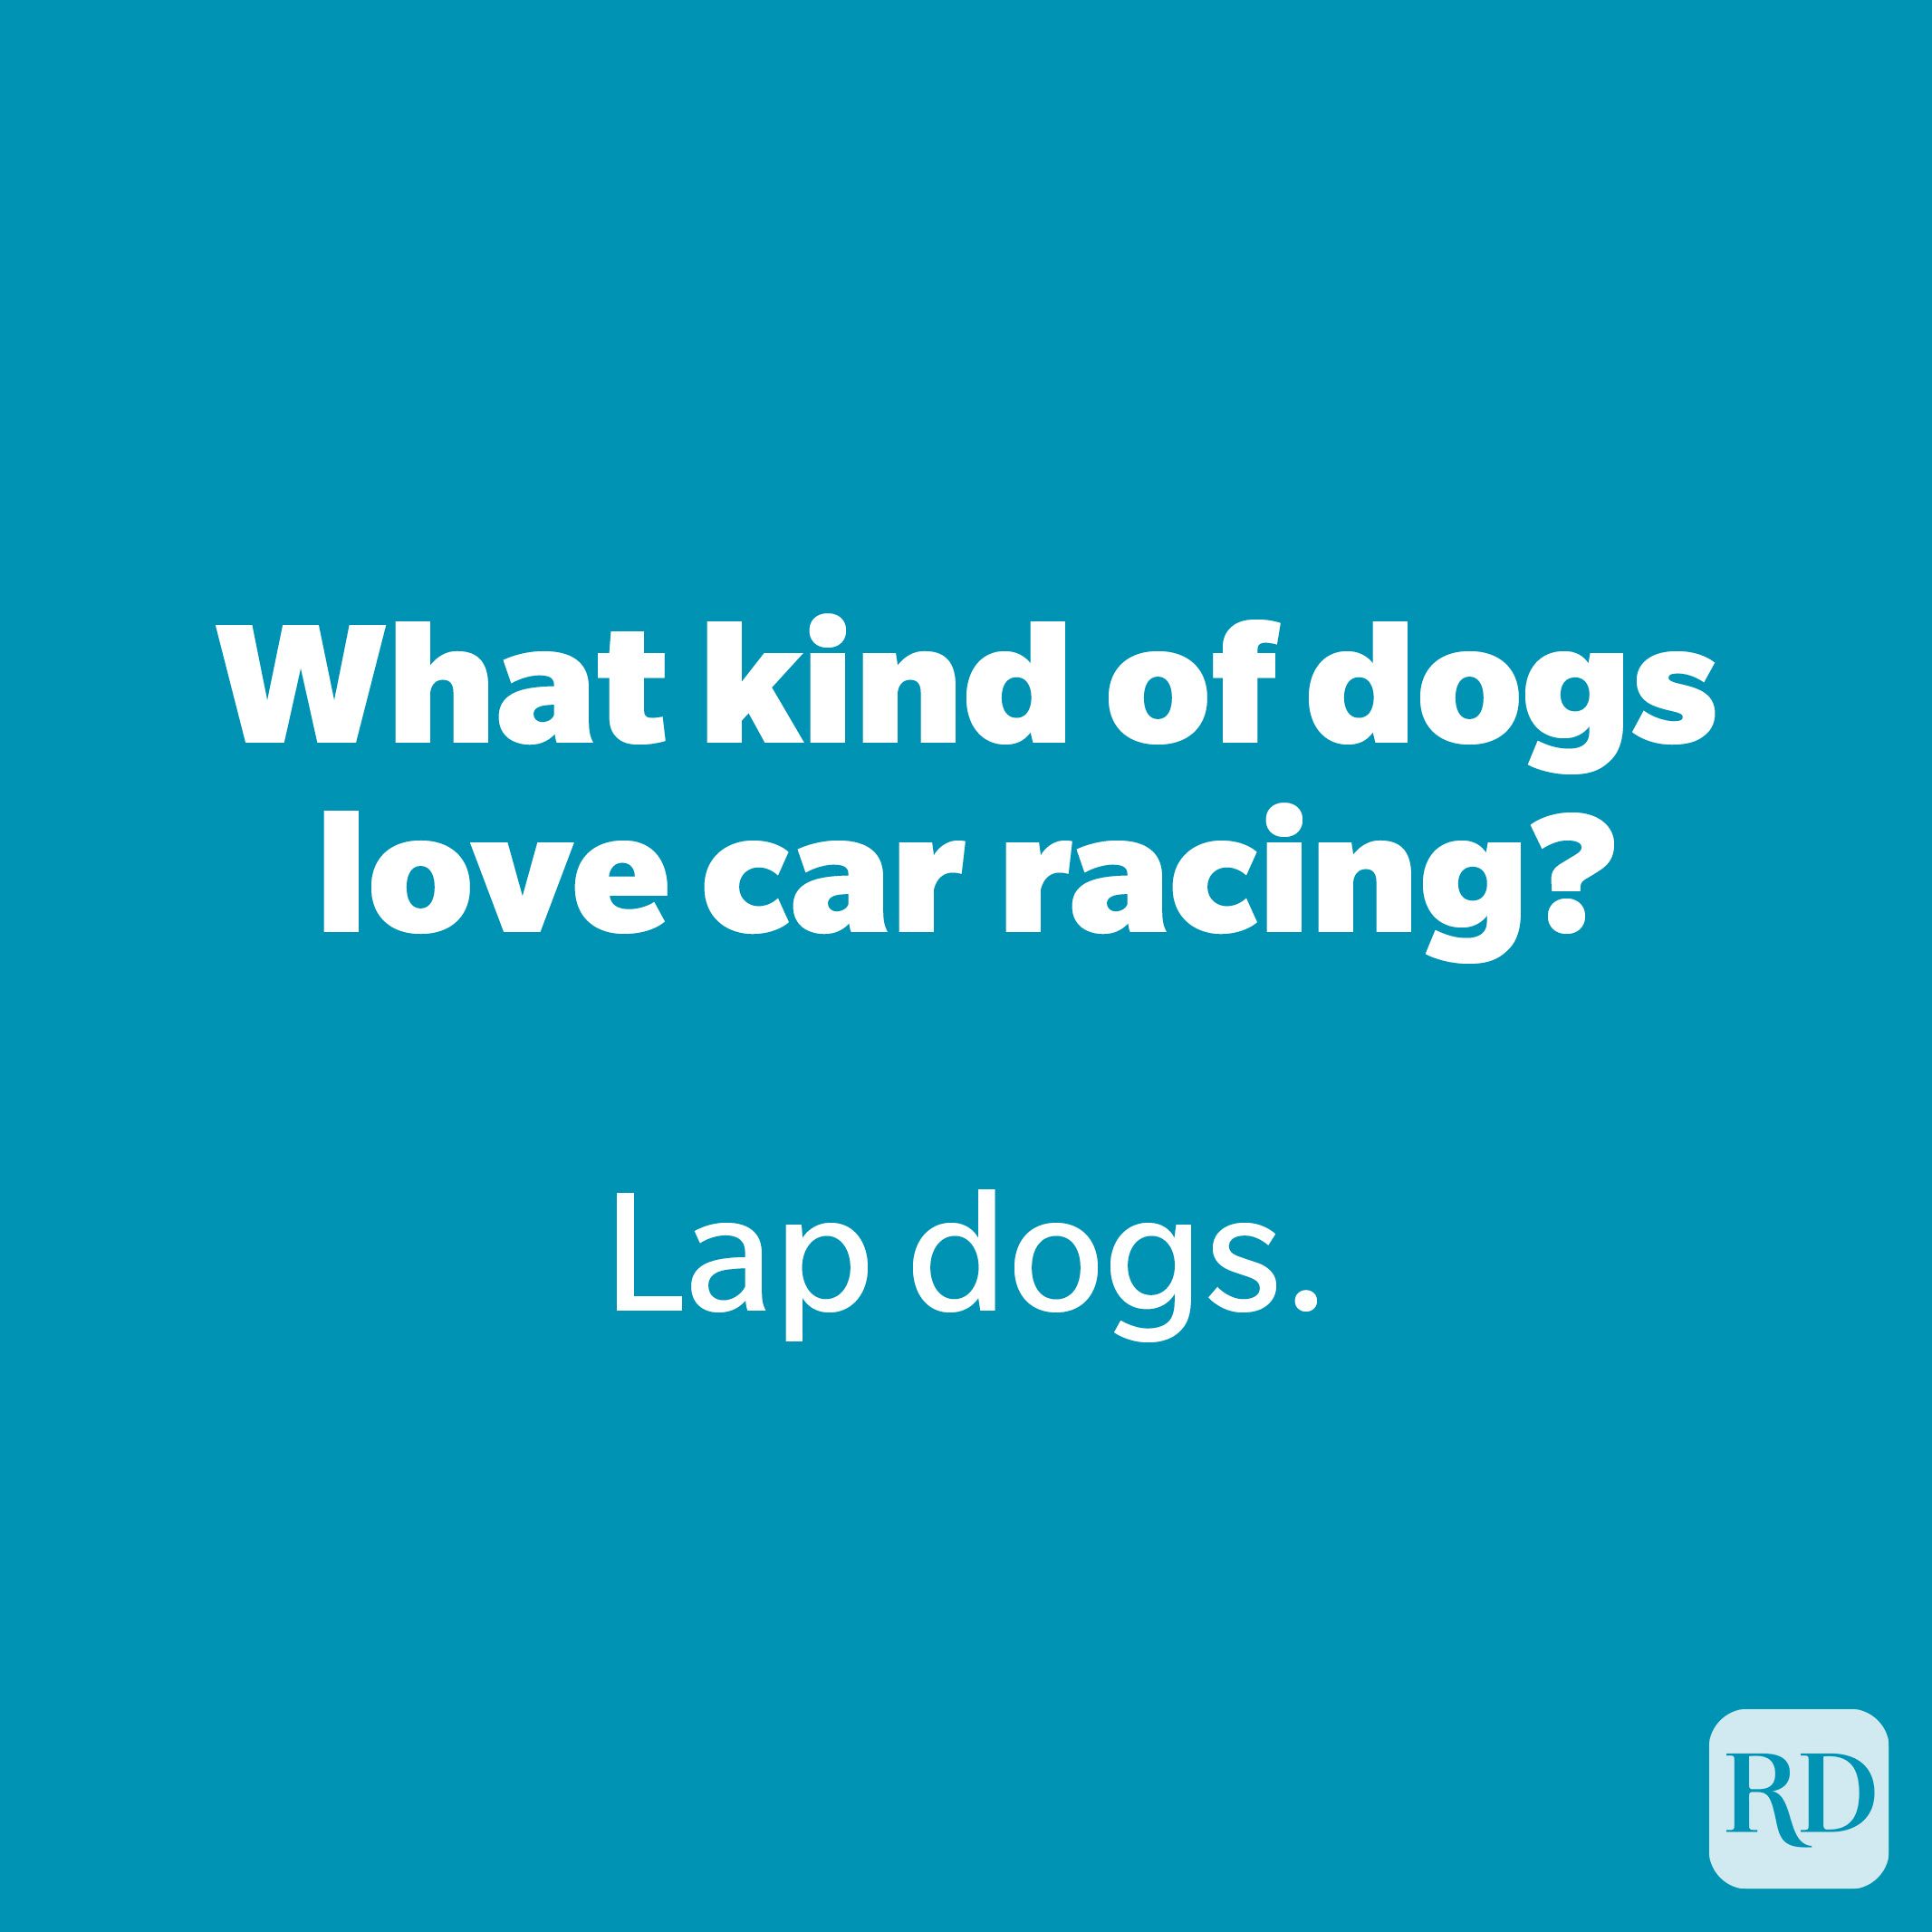 What kind of dogs love car racing?